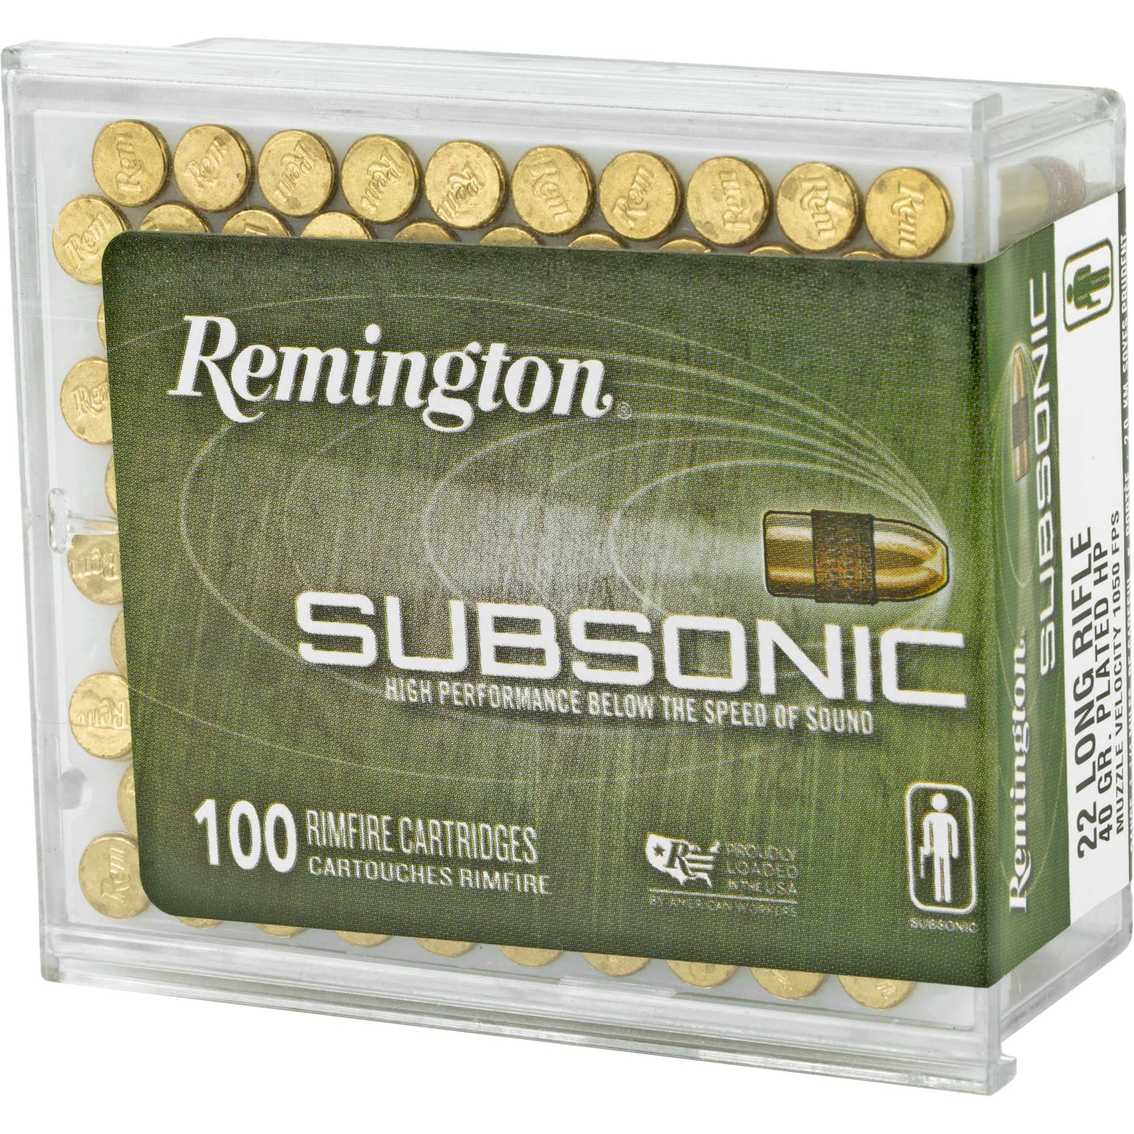 Remington Subsonic .22 Lr 40 Gr. Copper Plated Hollow Point 100 Rounds ...